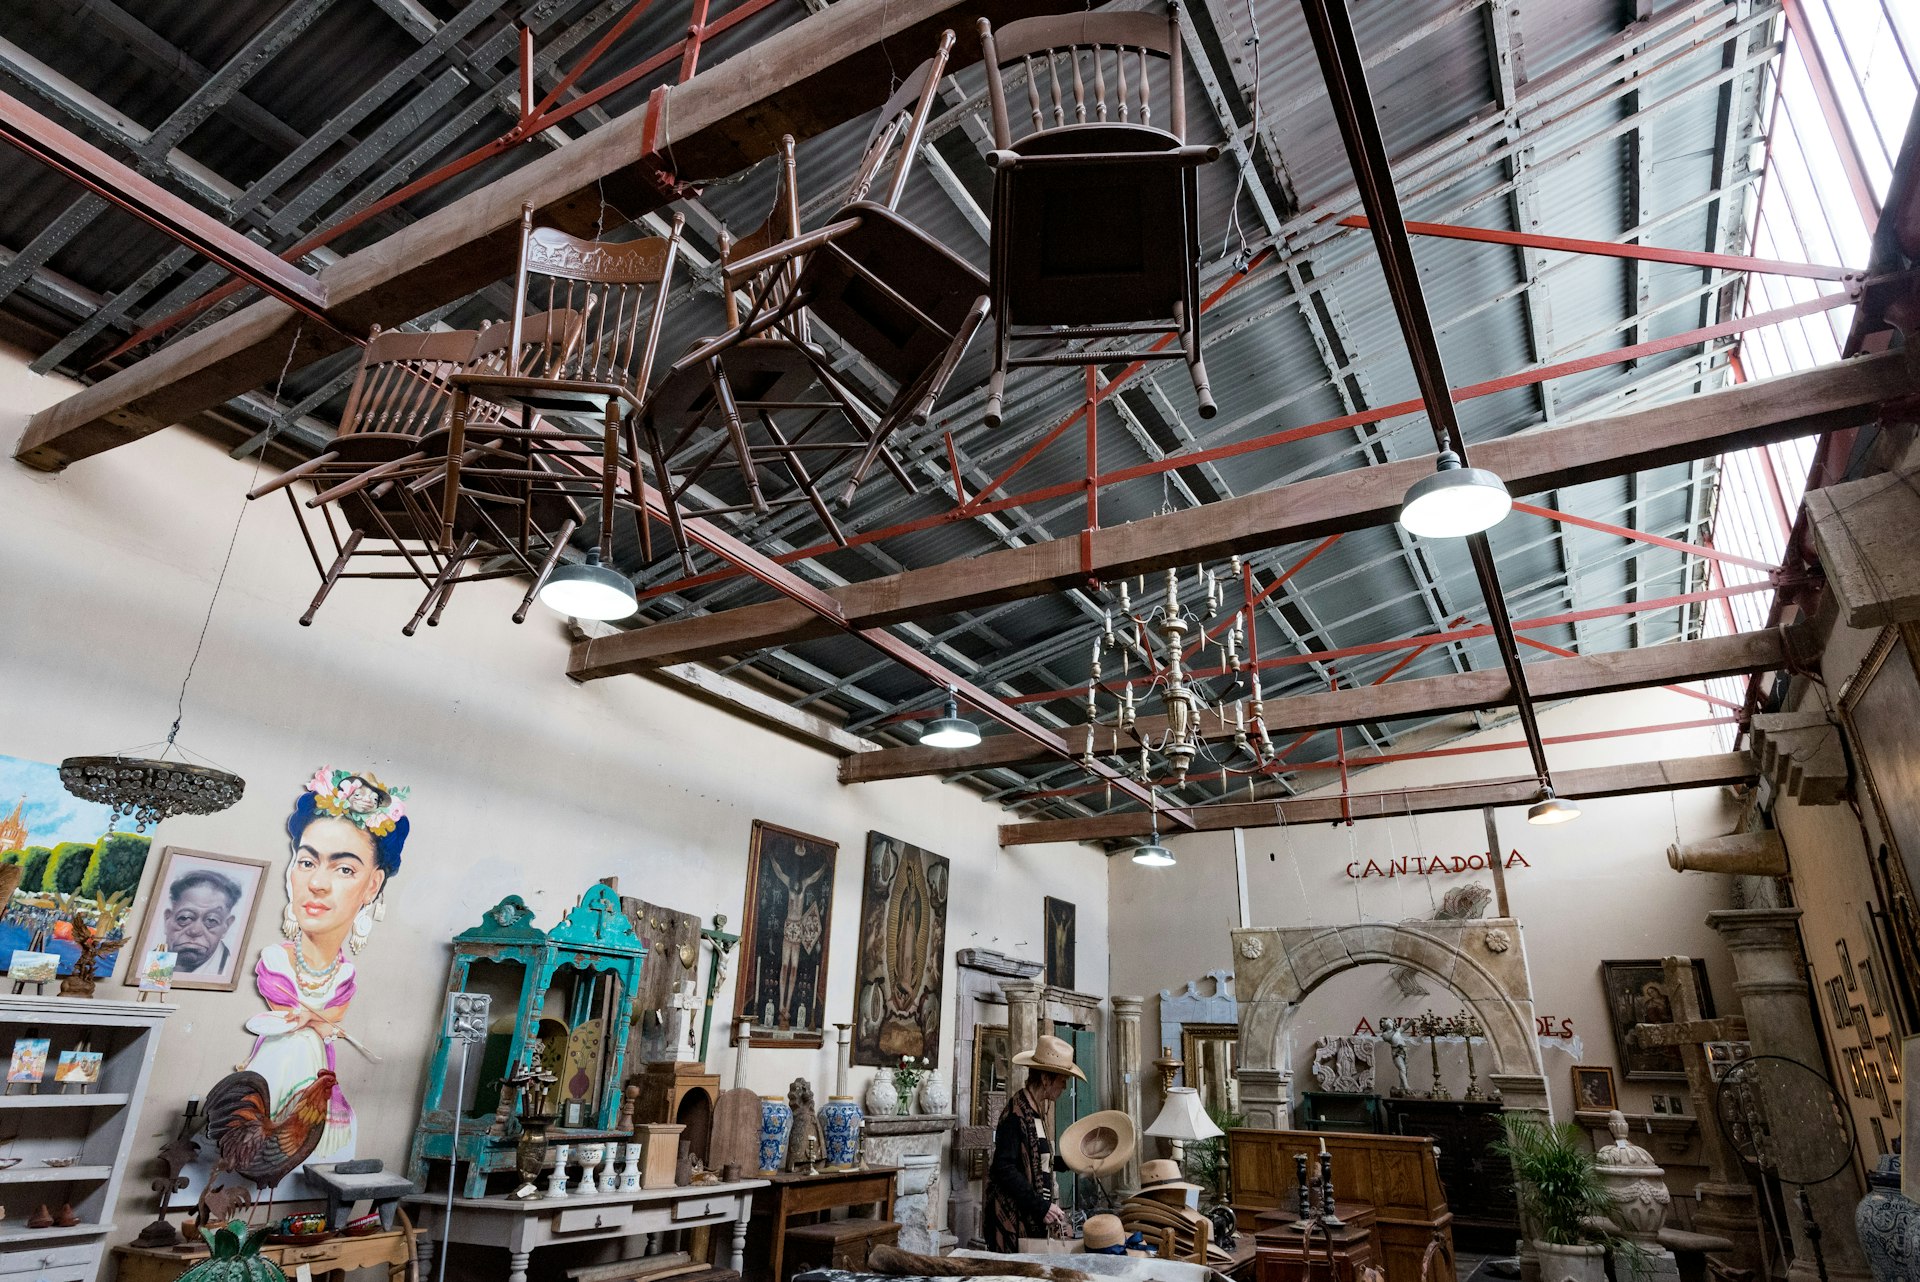 Chairs dangle from the wooden ceiling beams of a design complex, Fábrica La Aurora, where at ground level ornaments, homewares and antiques are on display